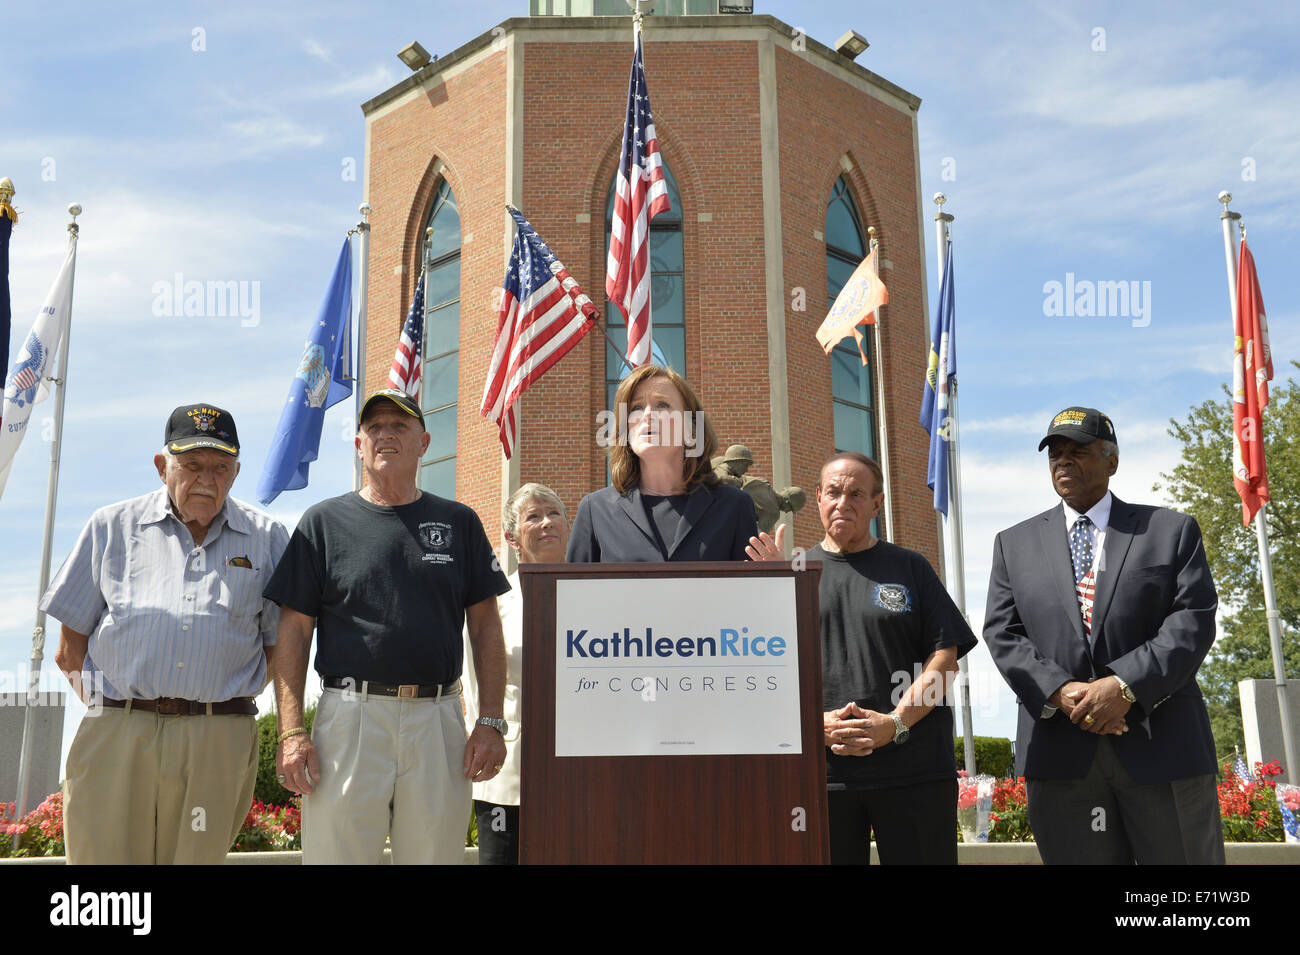 East Meadow, New York, USA. 3rd Sep, 2014. KATHLEEN RICE, at podium, Democratic congressional candidate (NY-04), releases a whitepaper on veterans policy and announces formation of her campaign's Veterans Advisory Committee, at Veterans Memorial at Eisenhower Park, after touring Northport VA Medical Center with outgoing Rep. CAROLYN MCCARTHY (in white jacket). Congresswoman McCarthy and 4 committee members joined Rice at the press conference: PAUL ZYDOR, (in blue shirt) of Merrick, U.S. Navy, Korean War Veteran; PAT YNGSTROM, (in black T-shirt and cap) of Merrick, U.S. Army Paratrooper, Viet Stock Photo